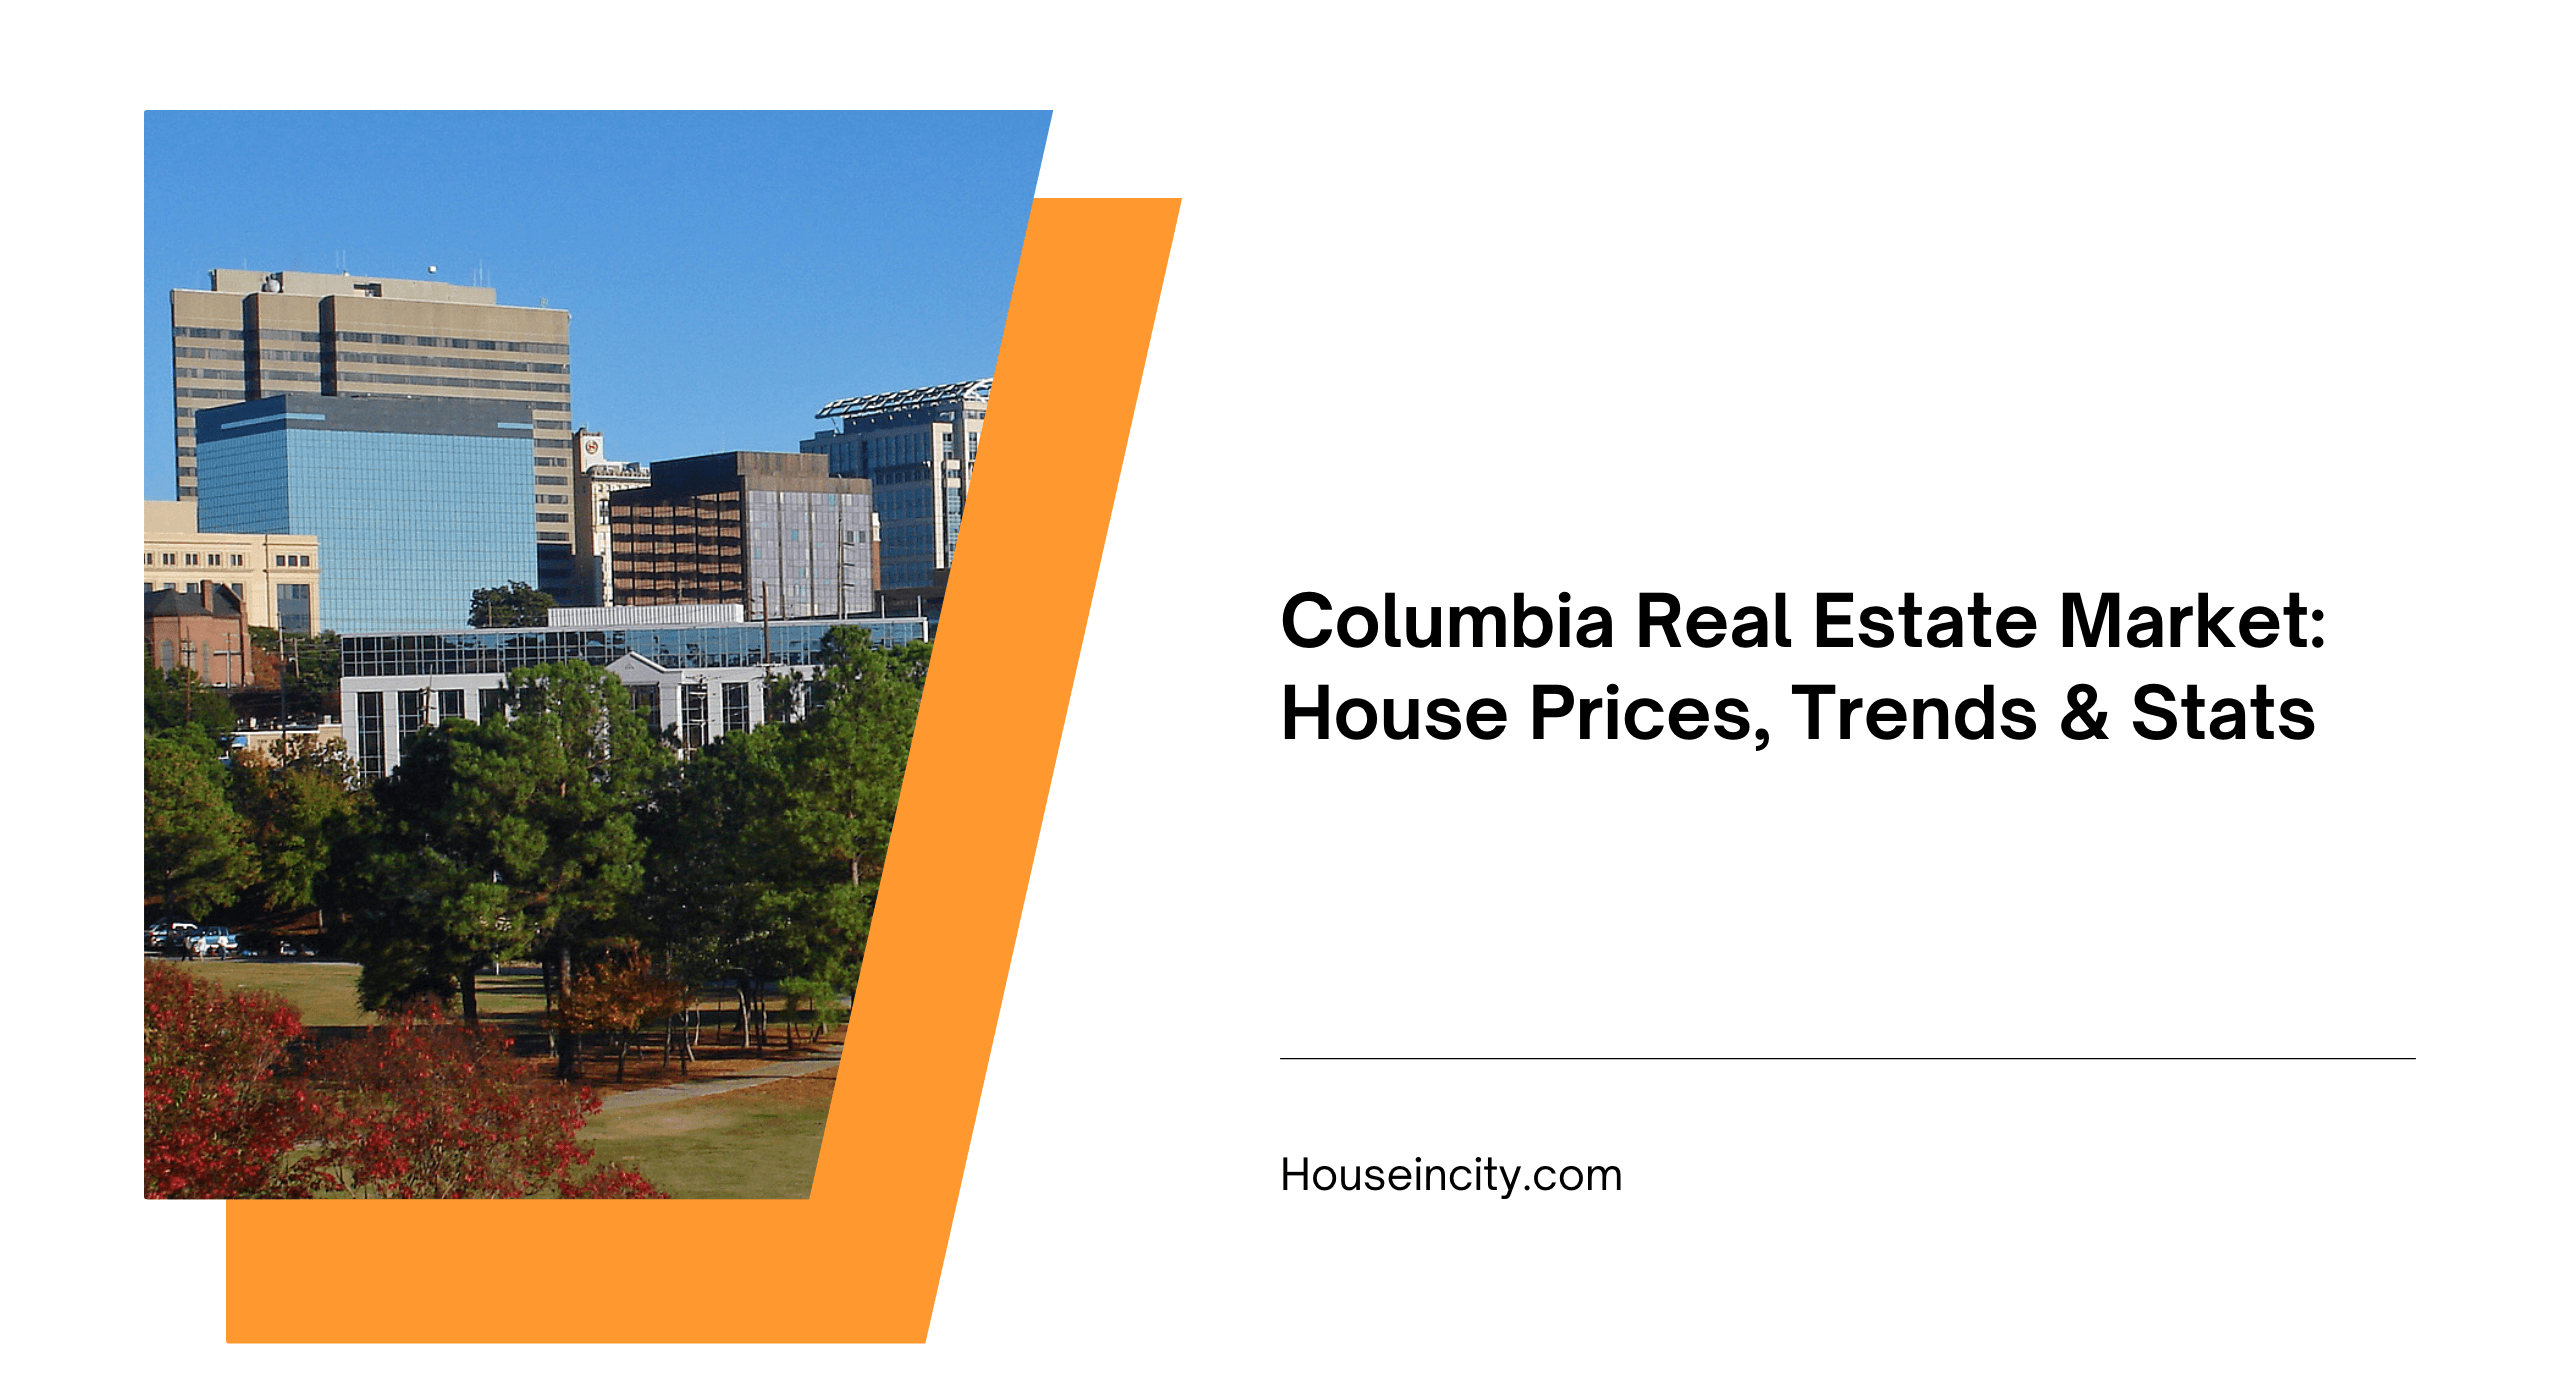 Columbia Real Estate Market: House Prices, Trends & Stats